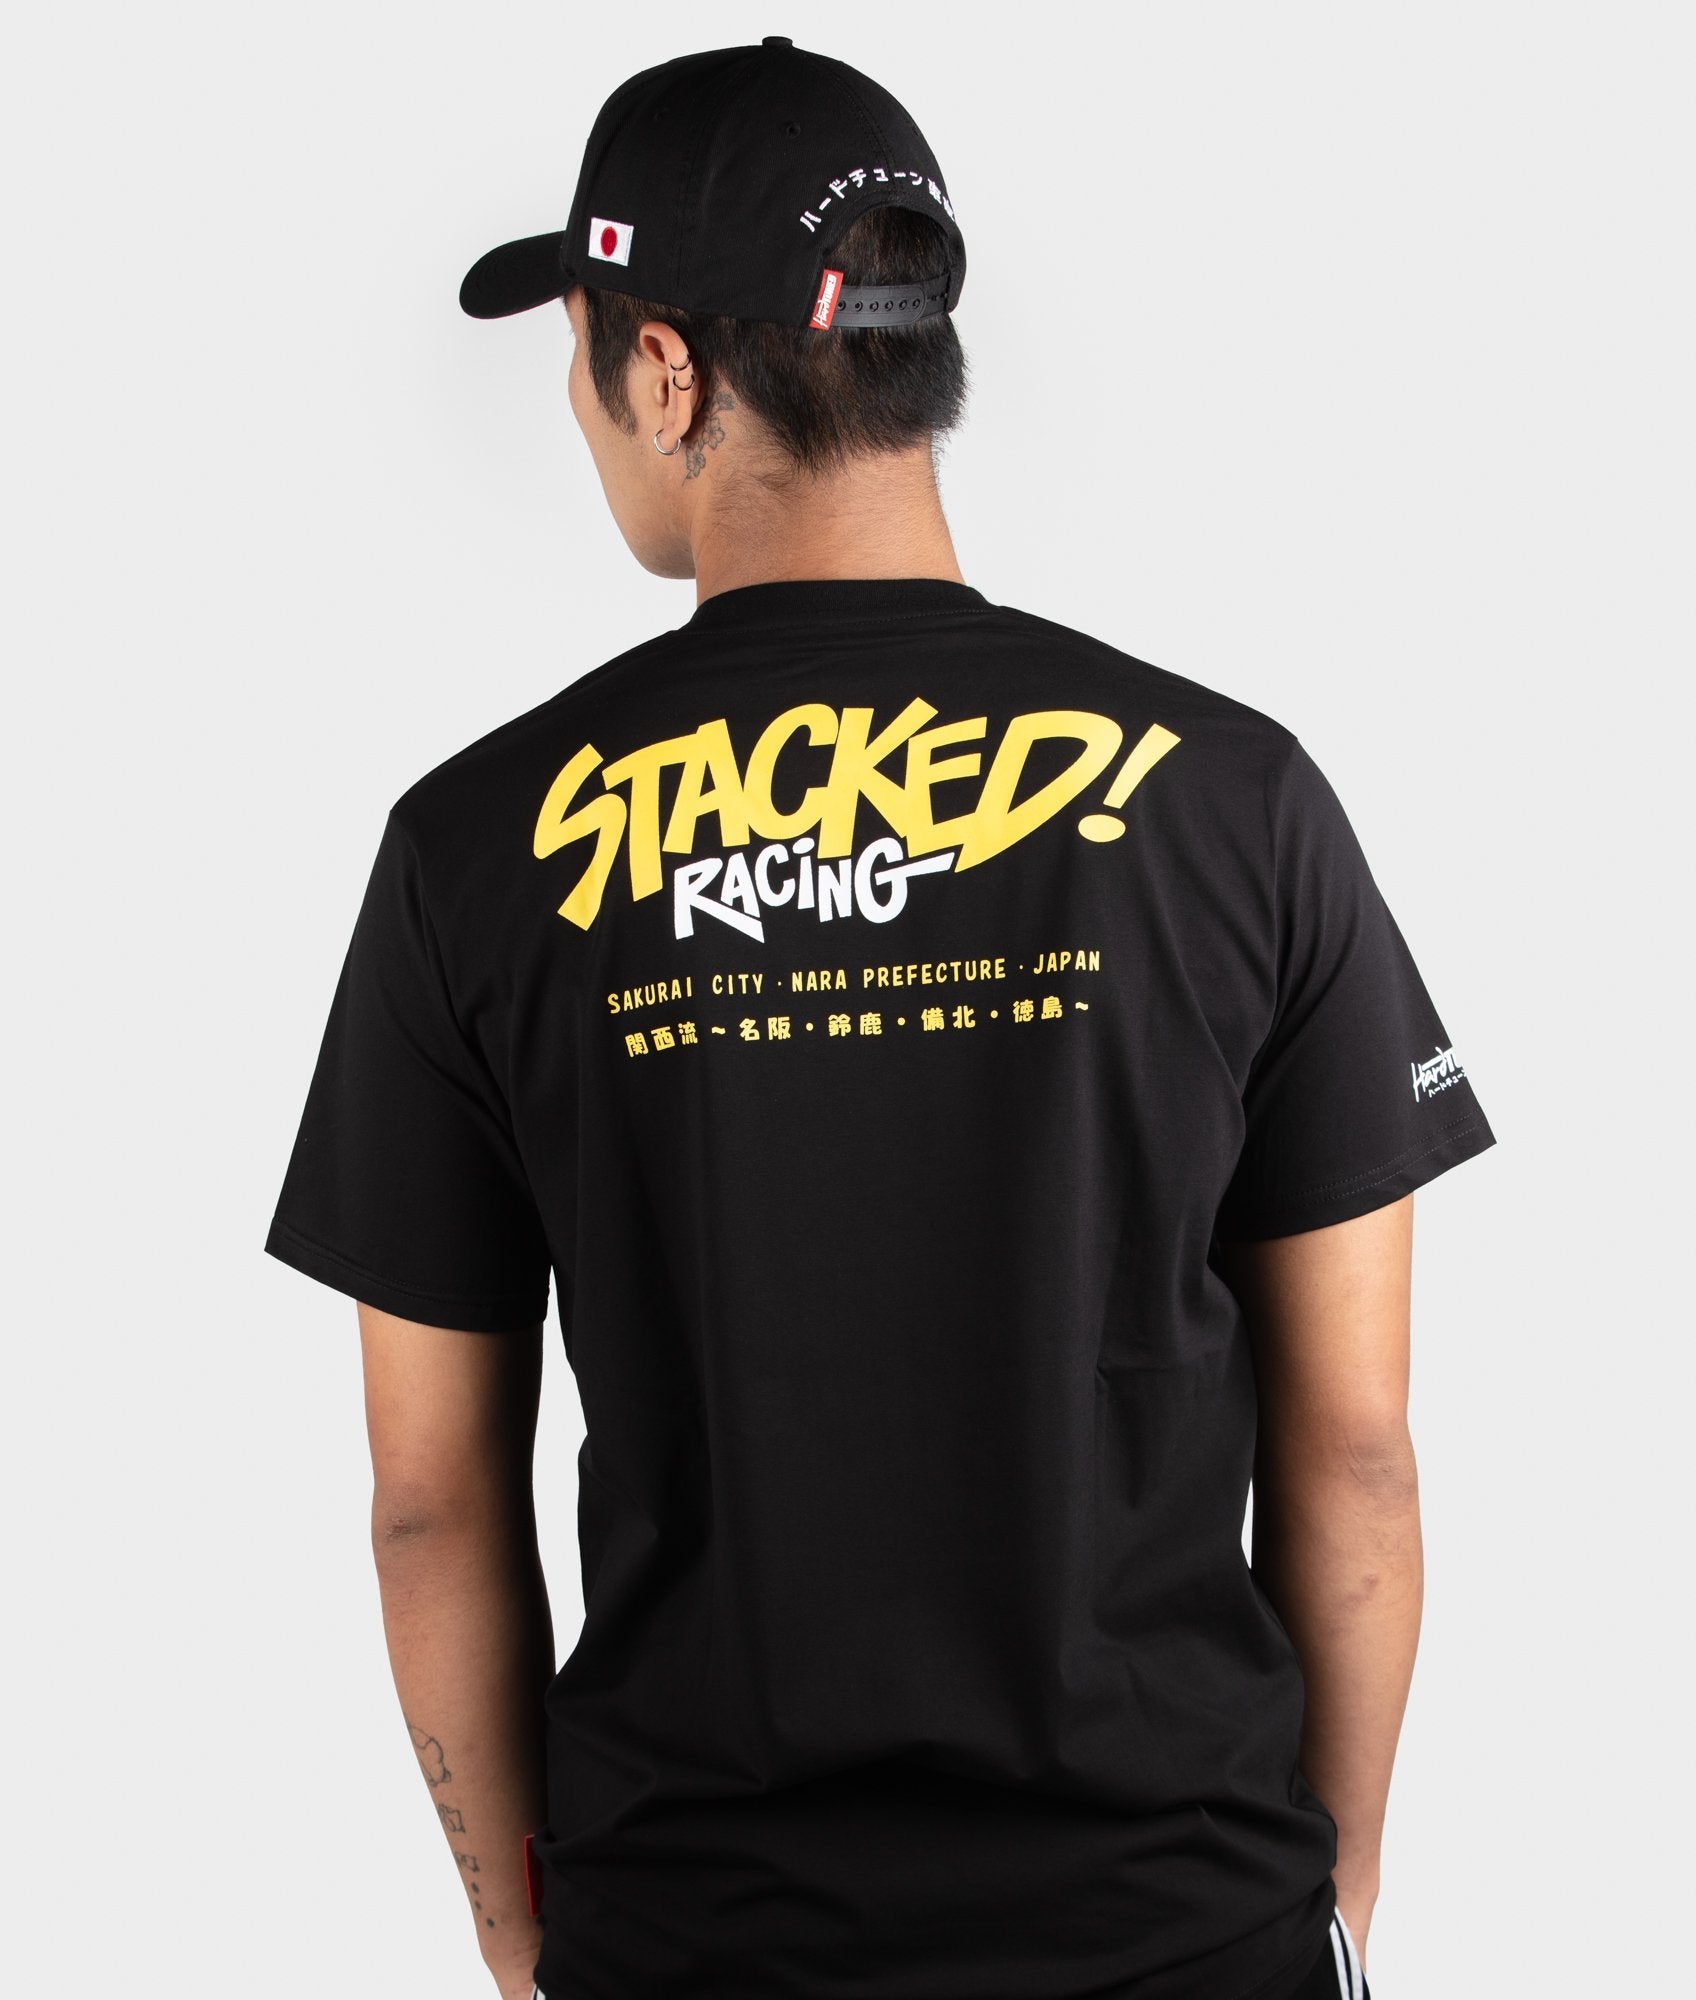 Stacked Racing Tee **LIMITED EDITION**